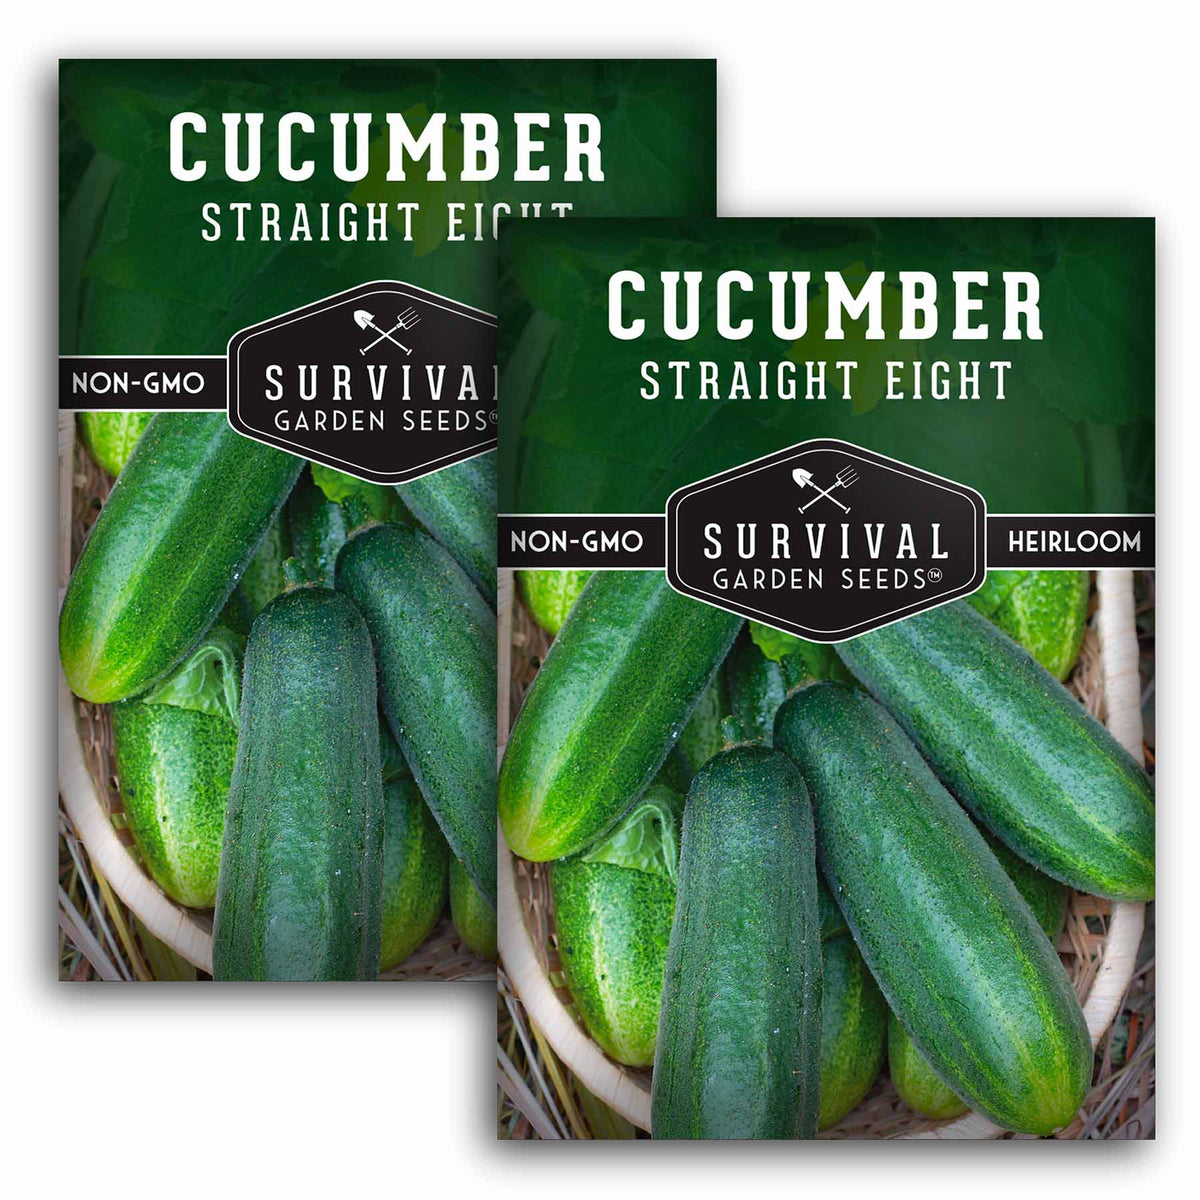 2 packets of Straight Eight Cucumber seeds